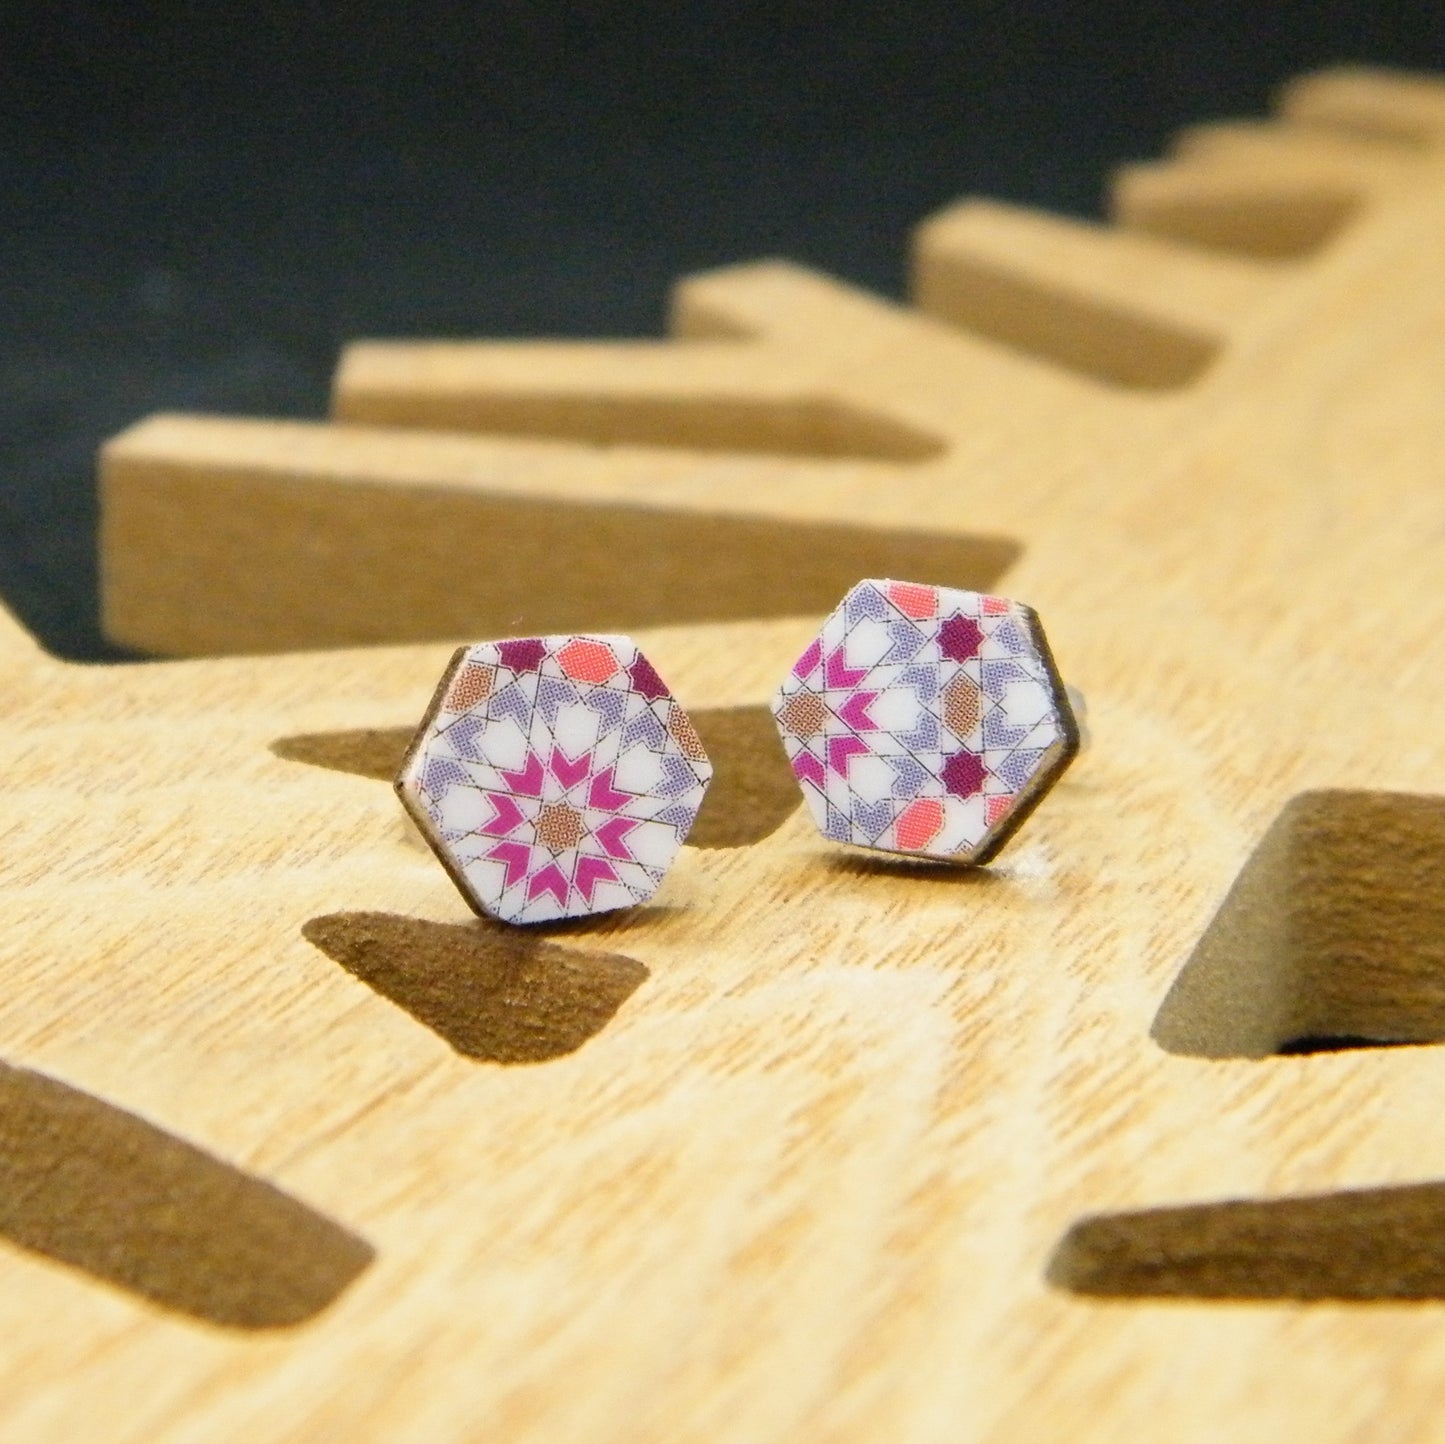 Quilted earrings